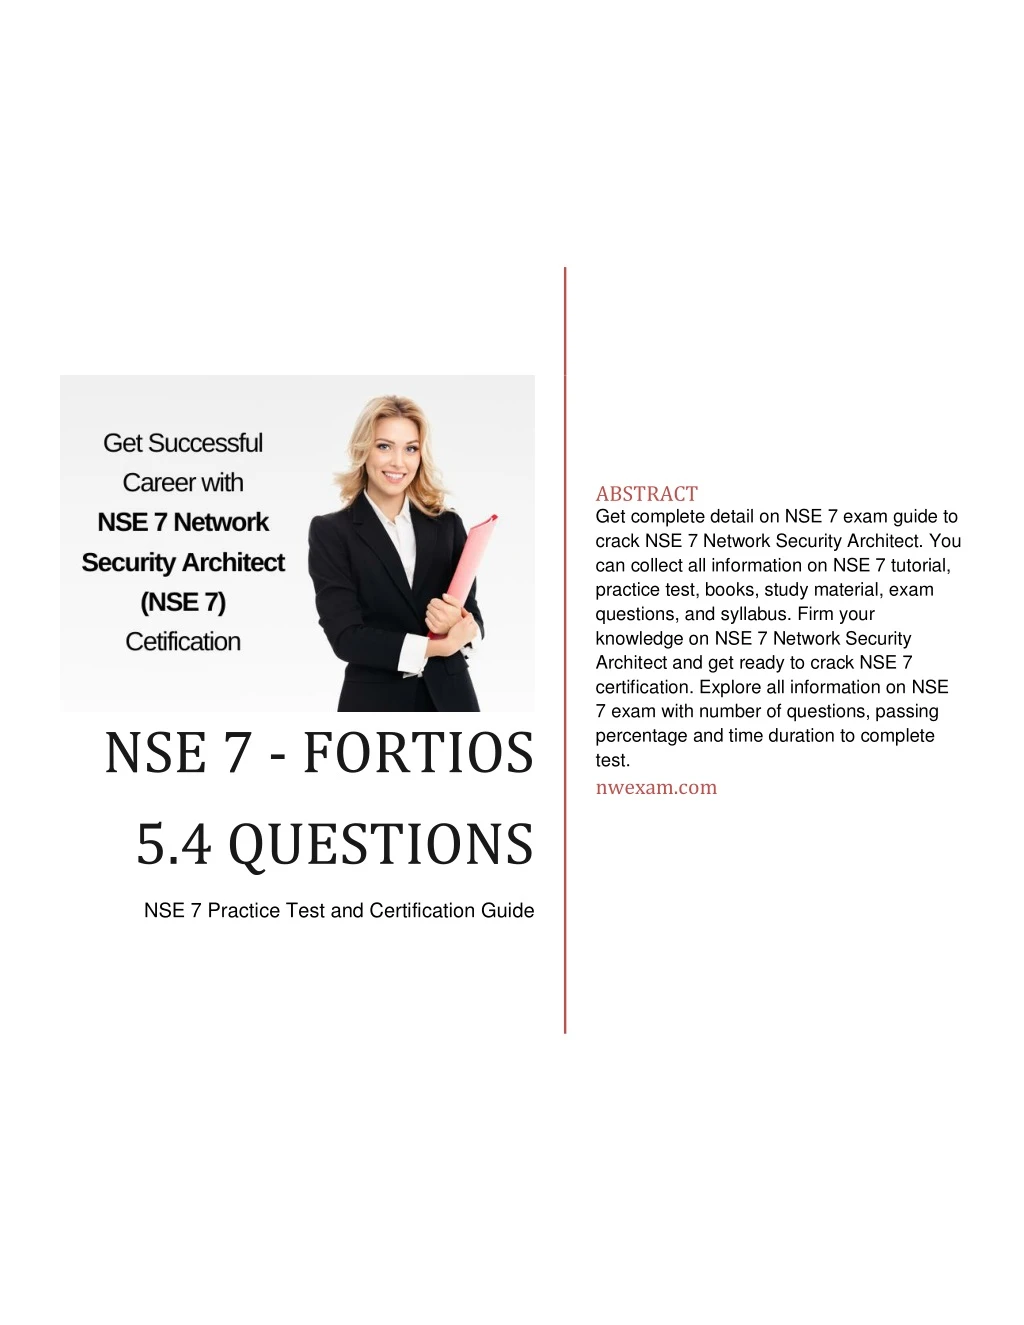 abstract get complete detail on nse 7 exam guide